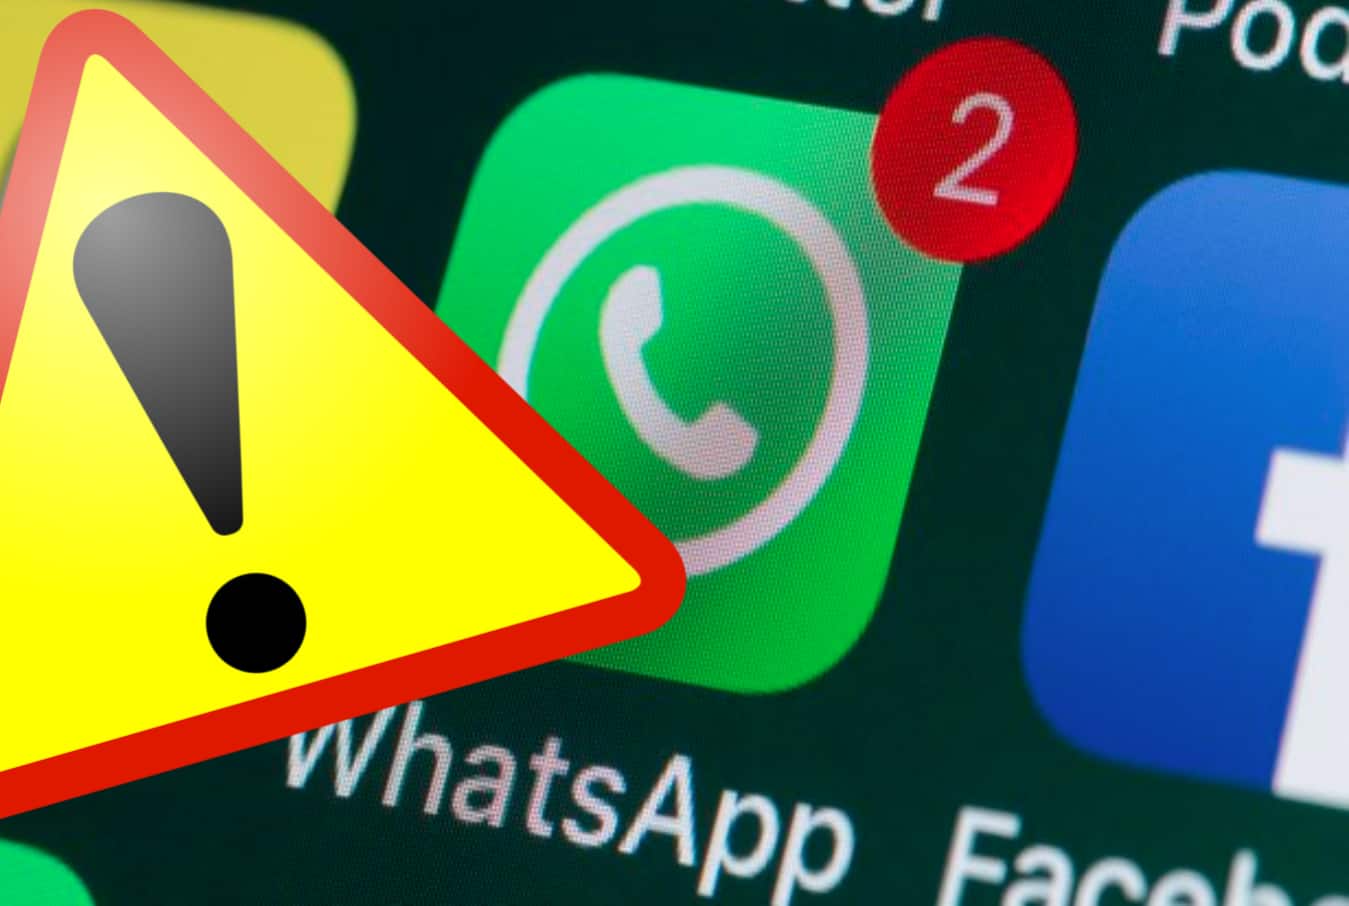 Investigators lost track of suspect after ill-timed WhatsApp hacking warning